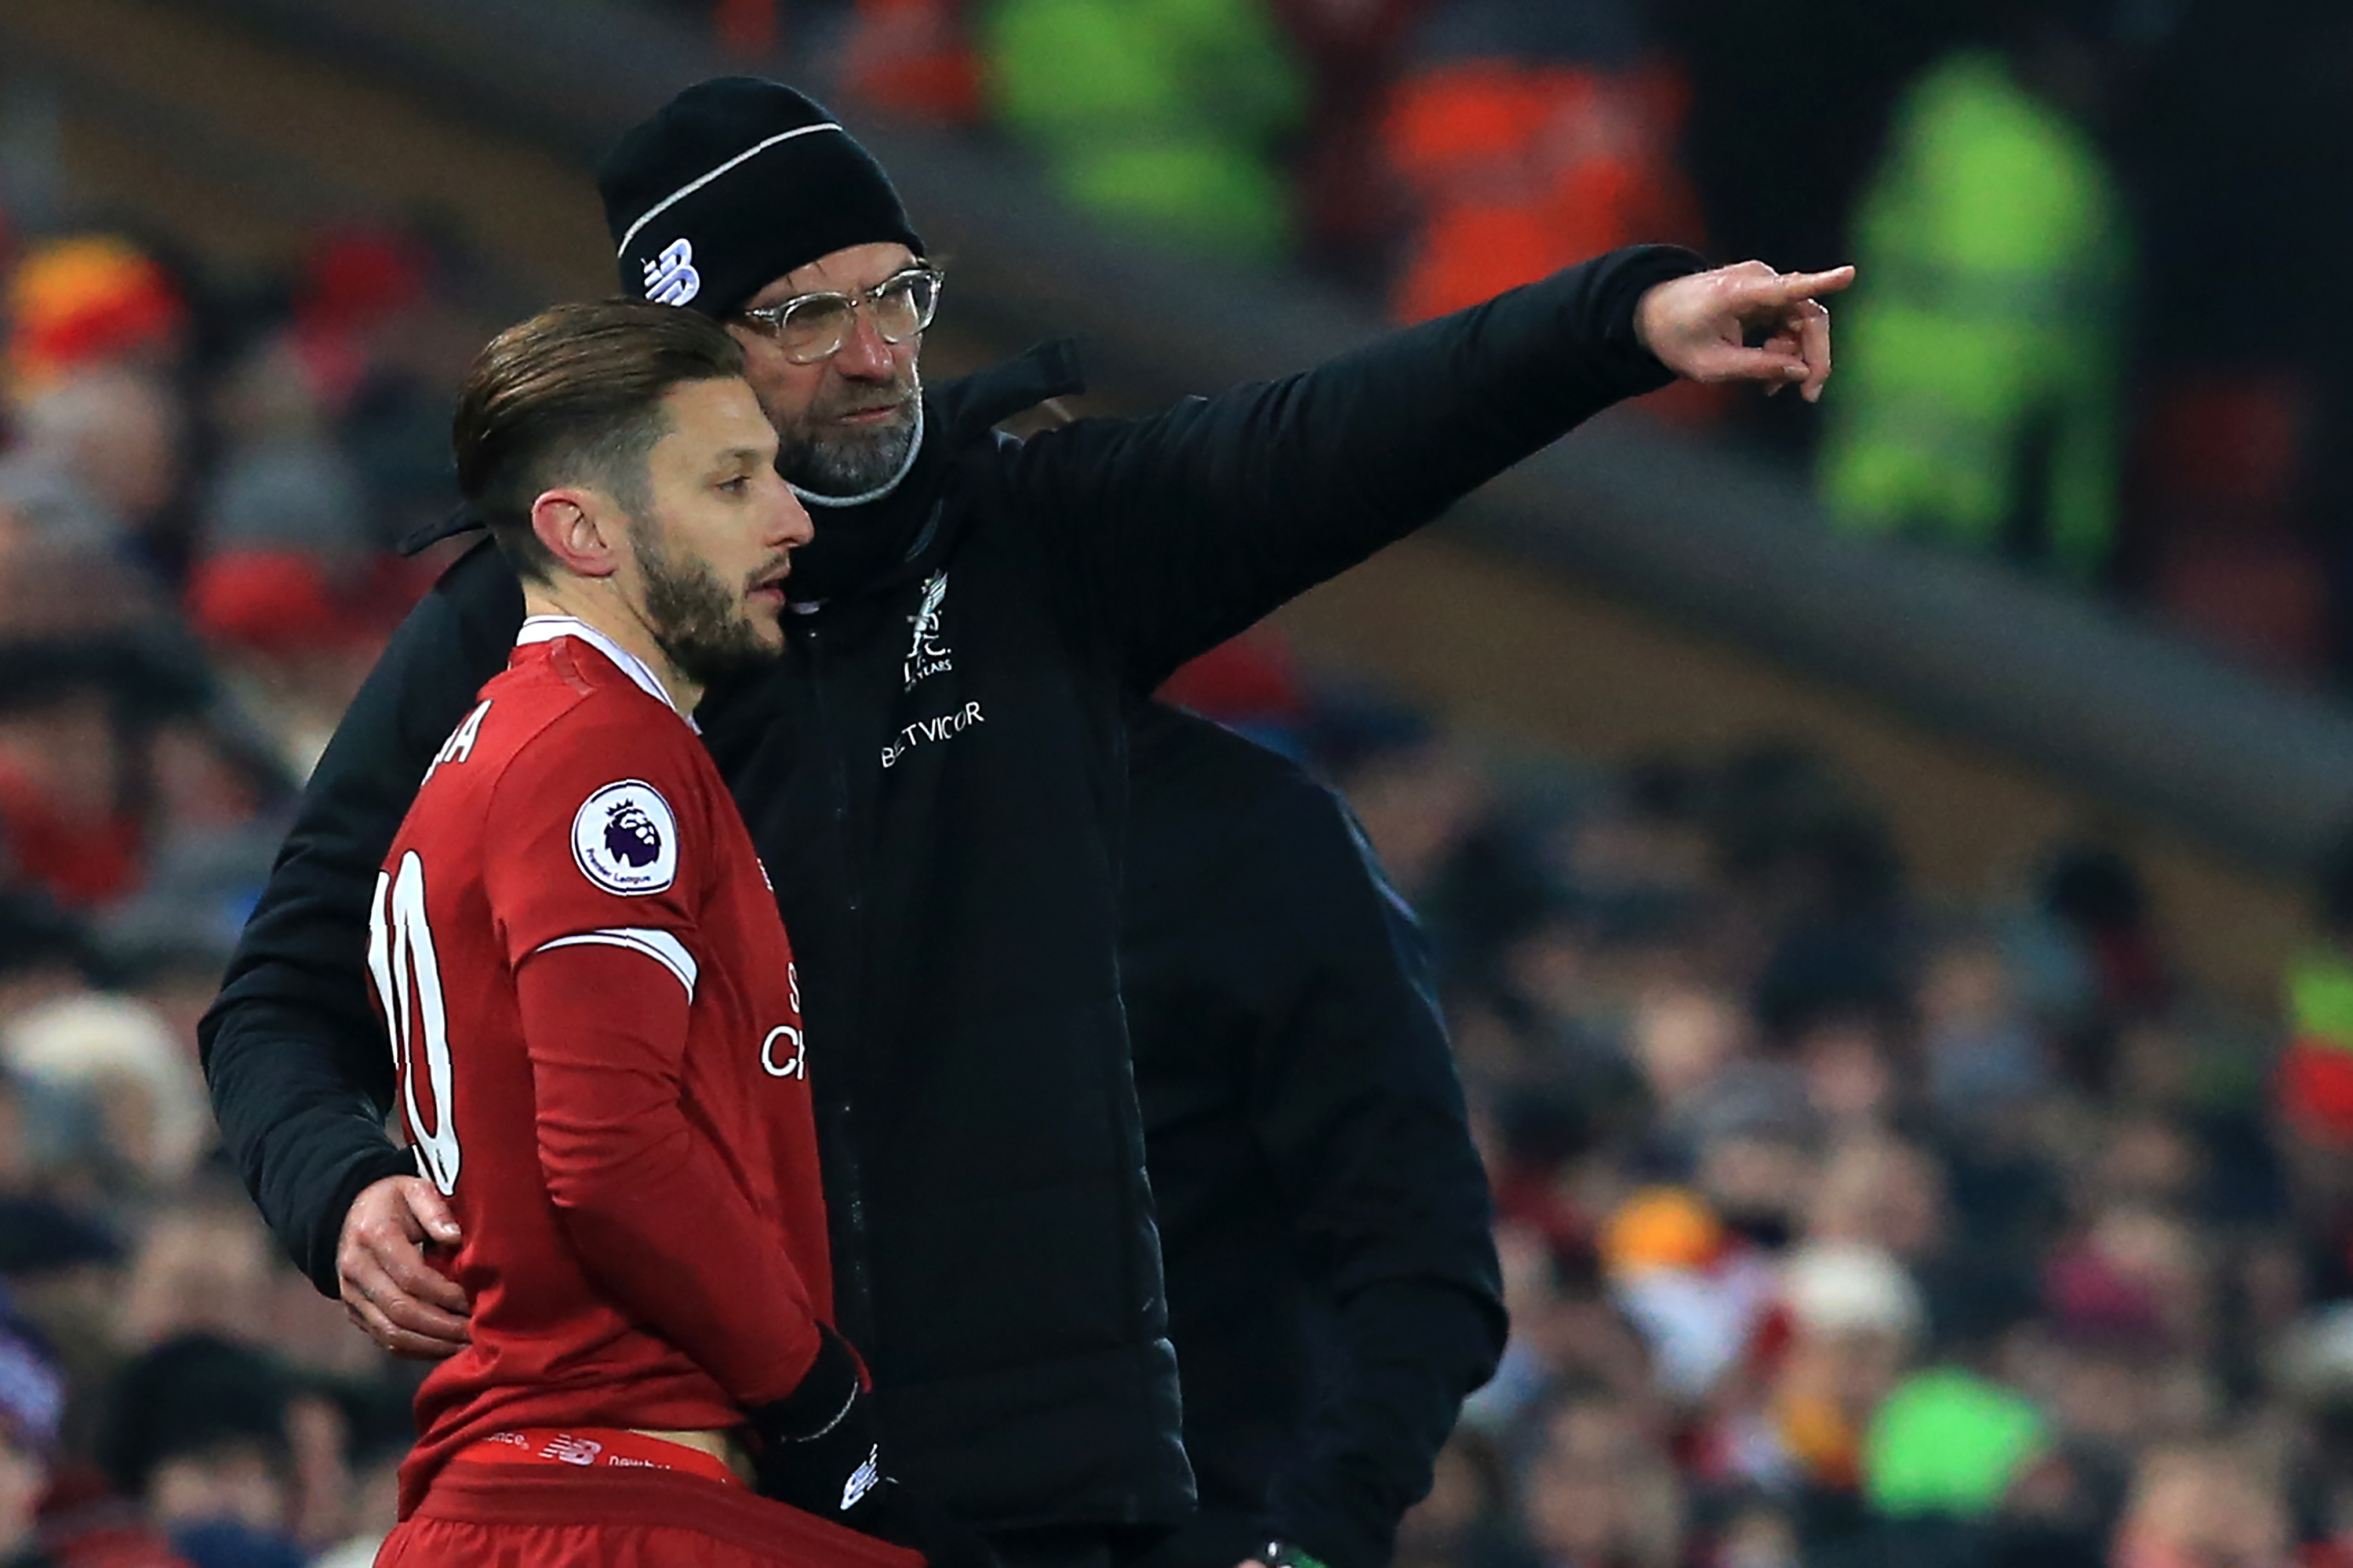 Liverpool's German manager Jurgen Klopp gives instructions to Liverpool's English midfielder Adam Lallana as he comes on as a substitute during the English Premier League football match between Liverpool and Newcastle at Anfield in Liverpool, north west England on March 3, 2018. / AFP PHOTO / Lindsey PARNABY / RESTRICTED TO EDITORIAL USE. No use with unauthorized audio, video, data, fixture lists, club/league logos or 'live' services. Online in-match use limited to 75 images, no video emulation. No use in betting, games or single club/league/player publications.  /         (Photo credit should read LINDSEY PARNABY/AFP/Getty Images)